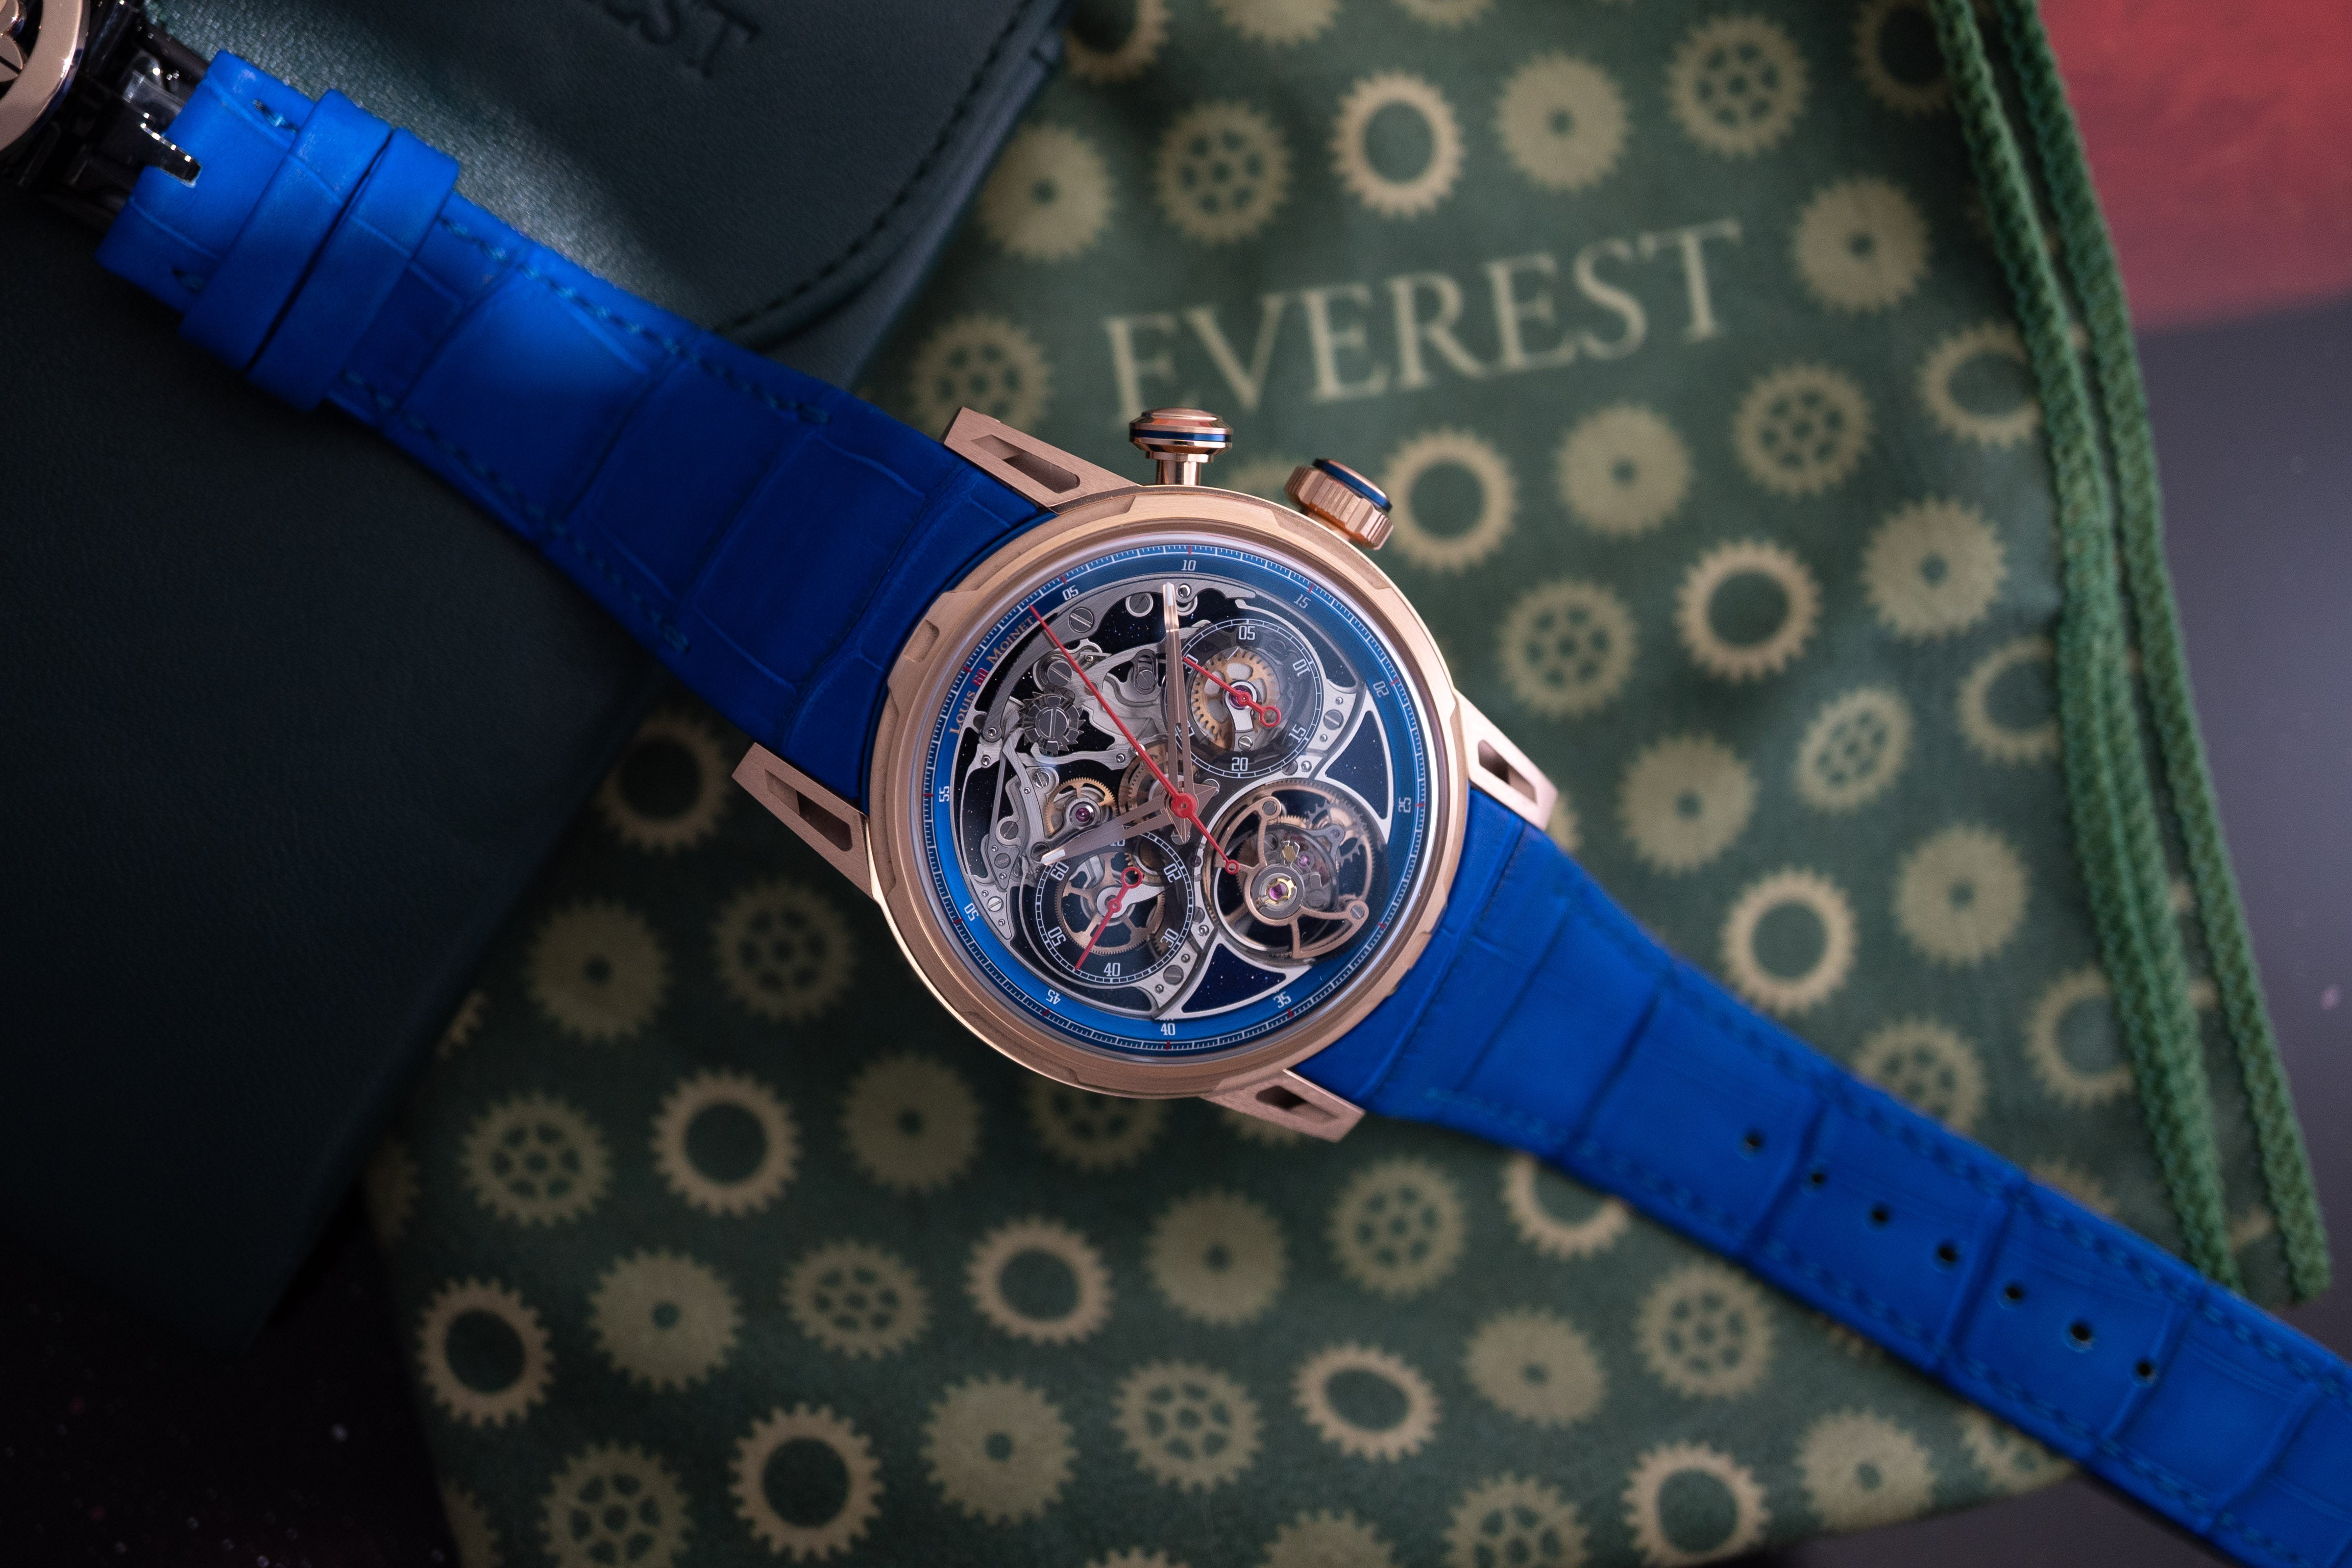 louis moinet watches price